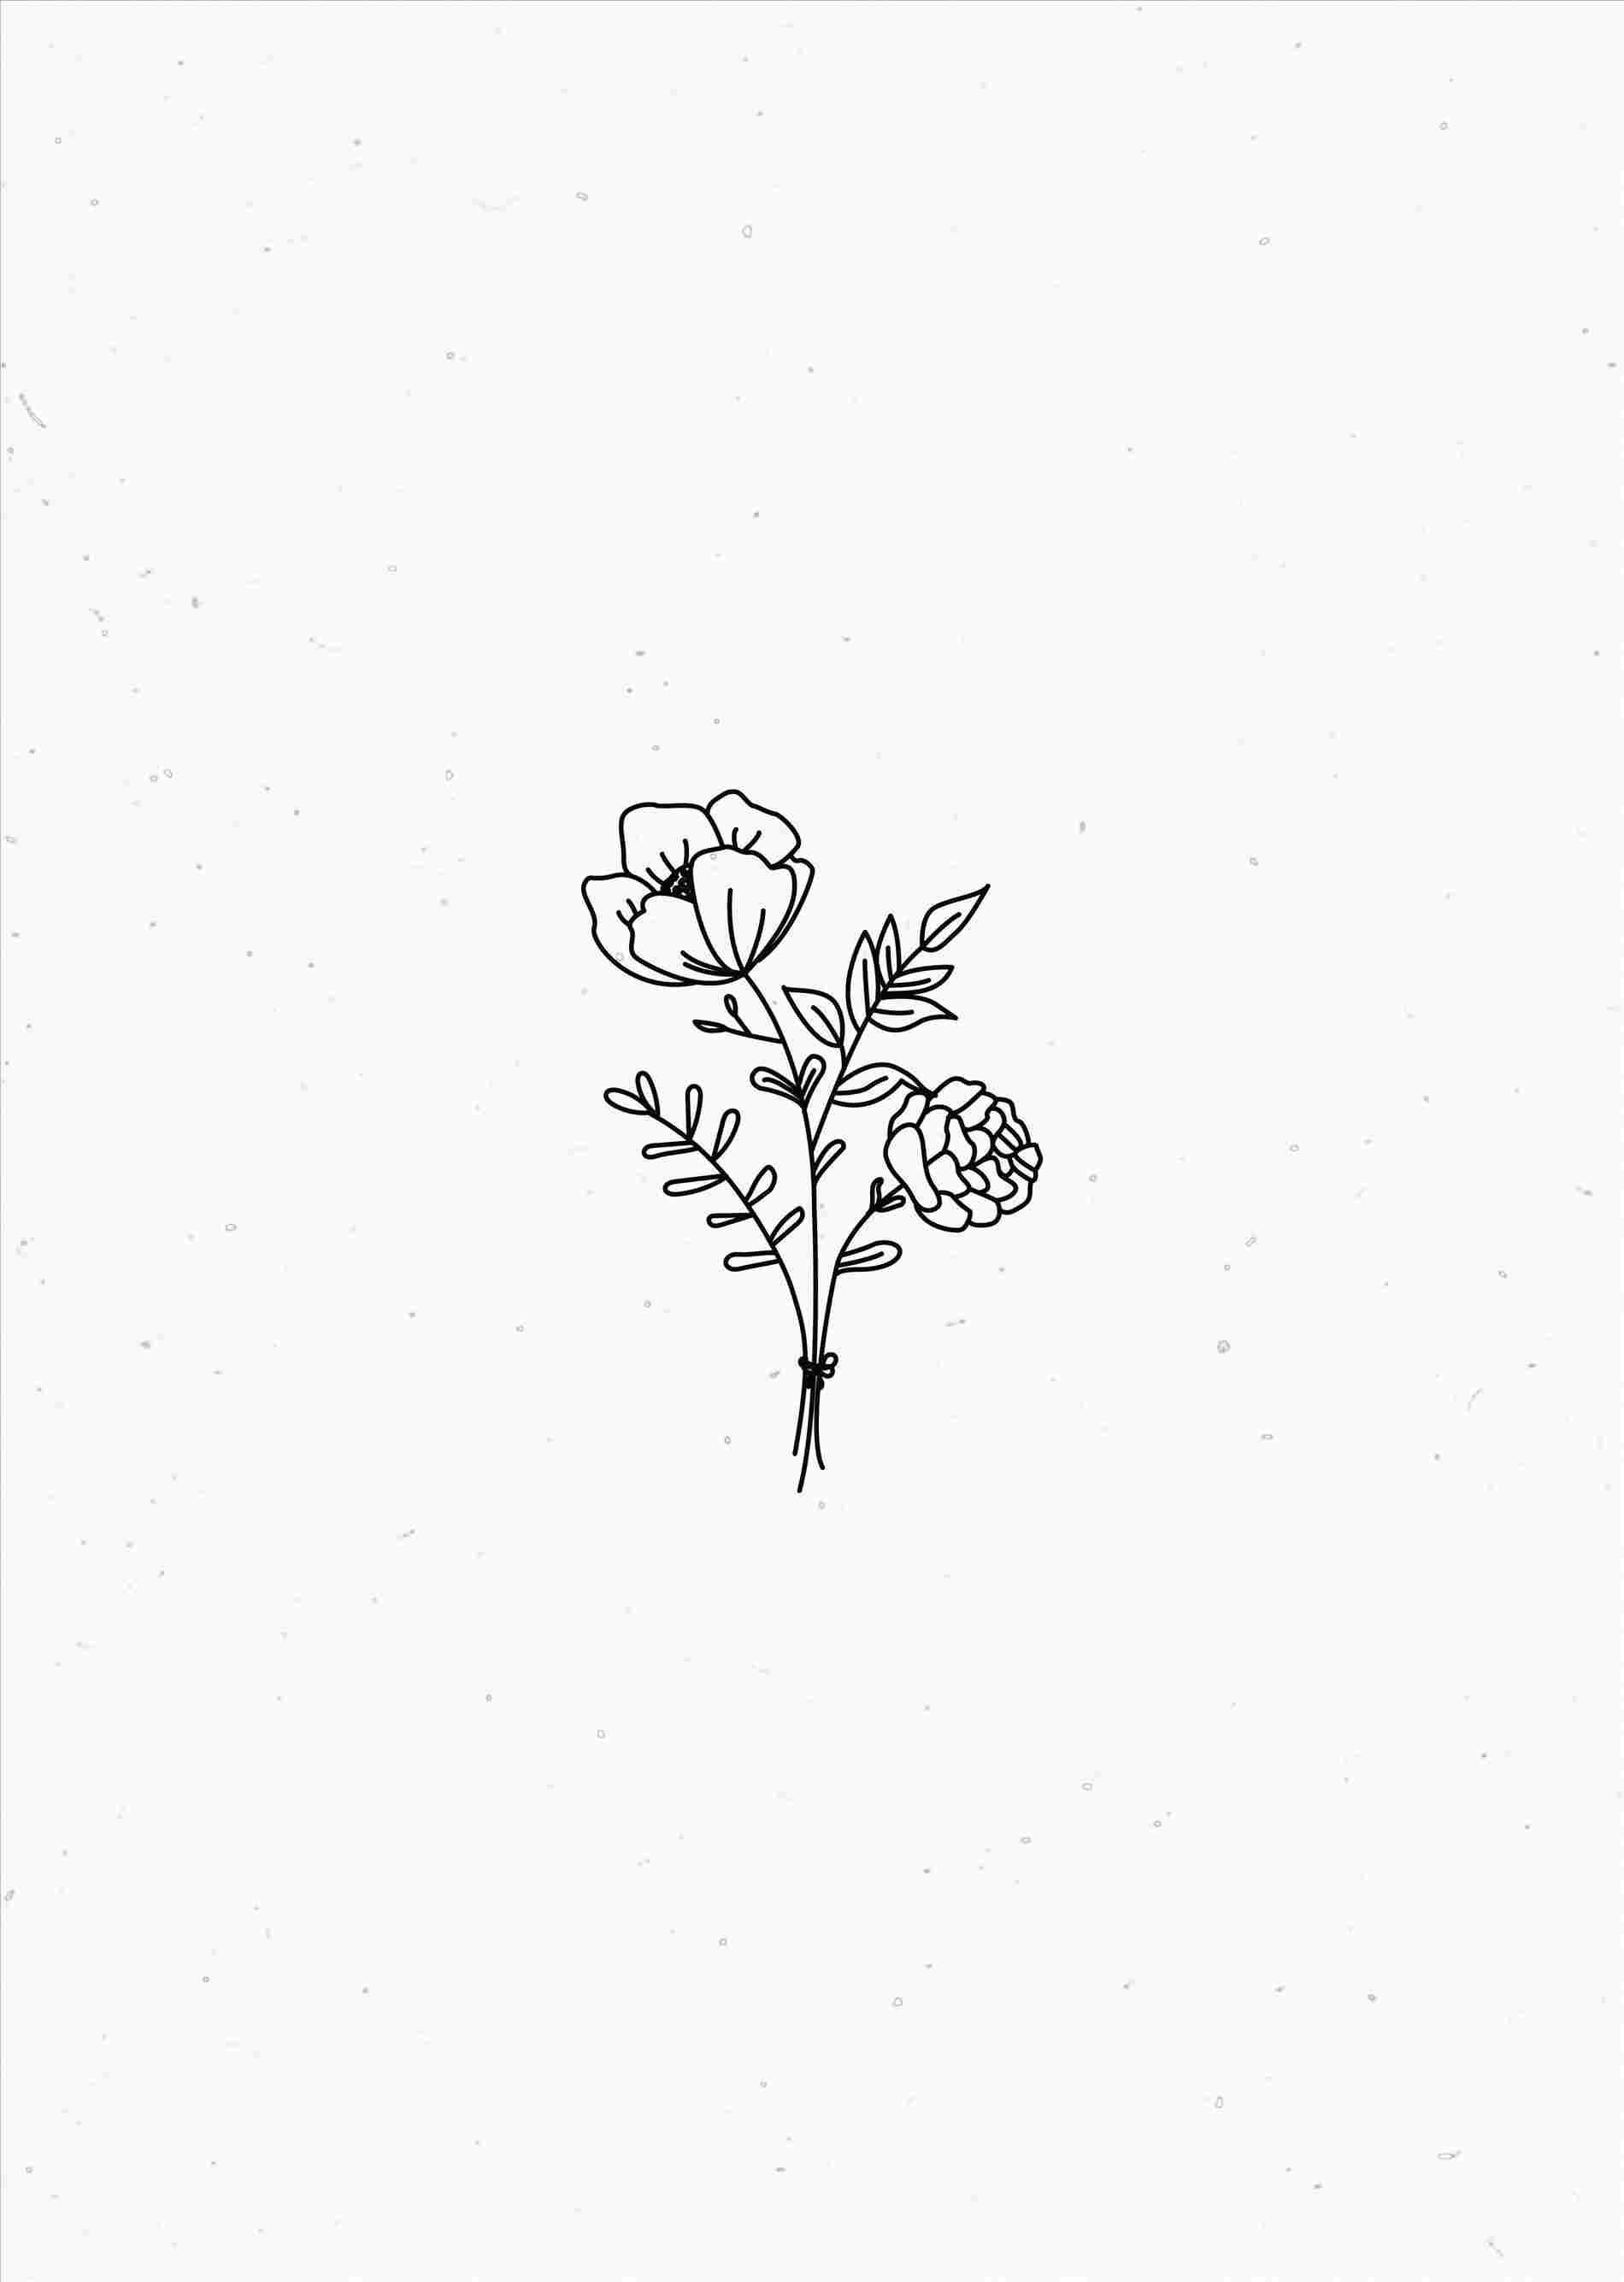 Minimalist Plant Drawing Wallpapers Top Free Minimalist Plant Drawing